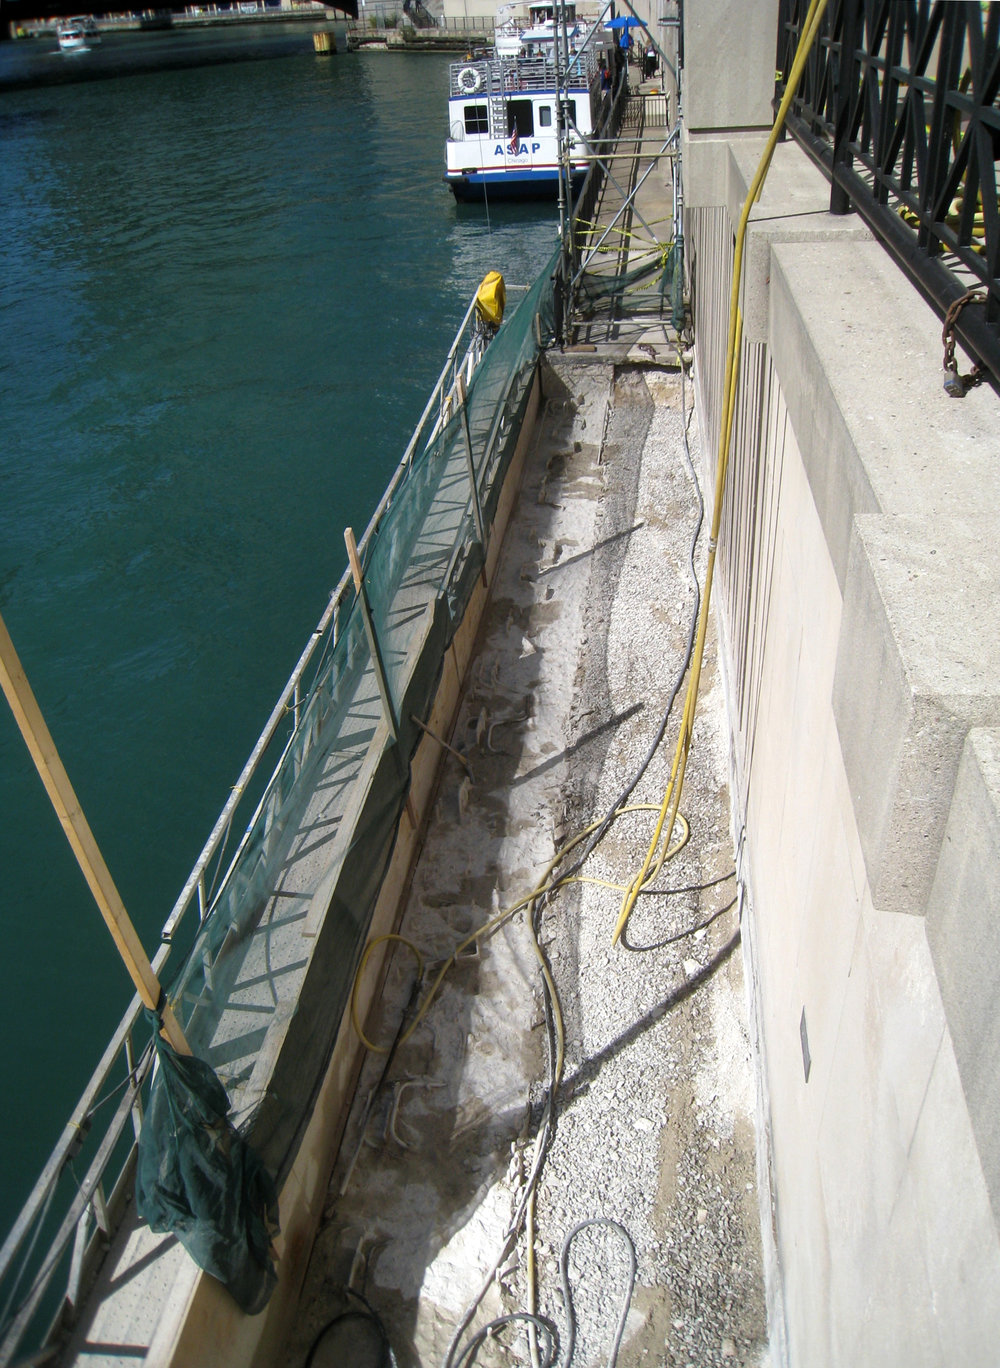 Under construction: lowering the dock to accommodate the boat deck height